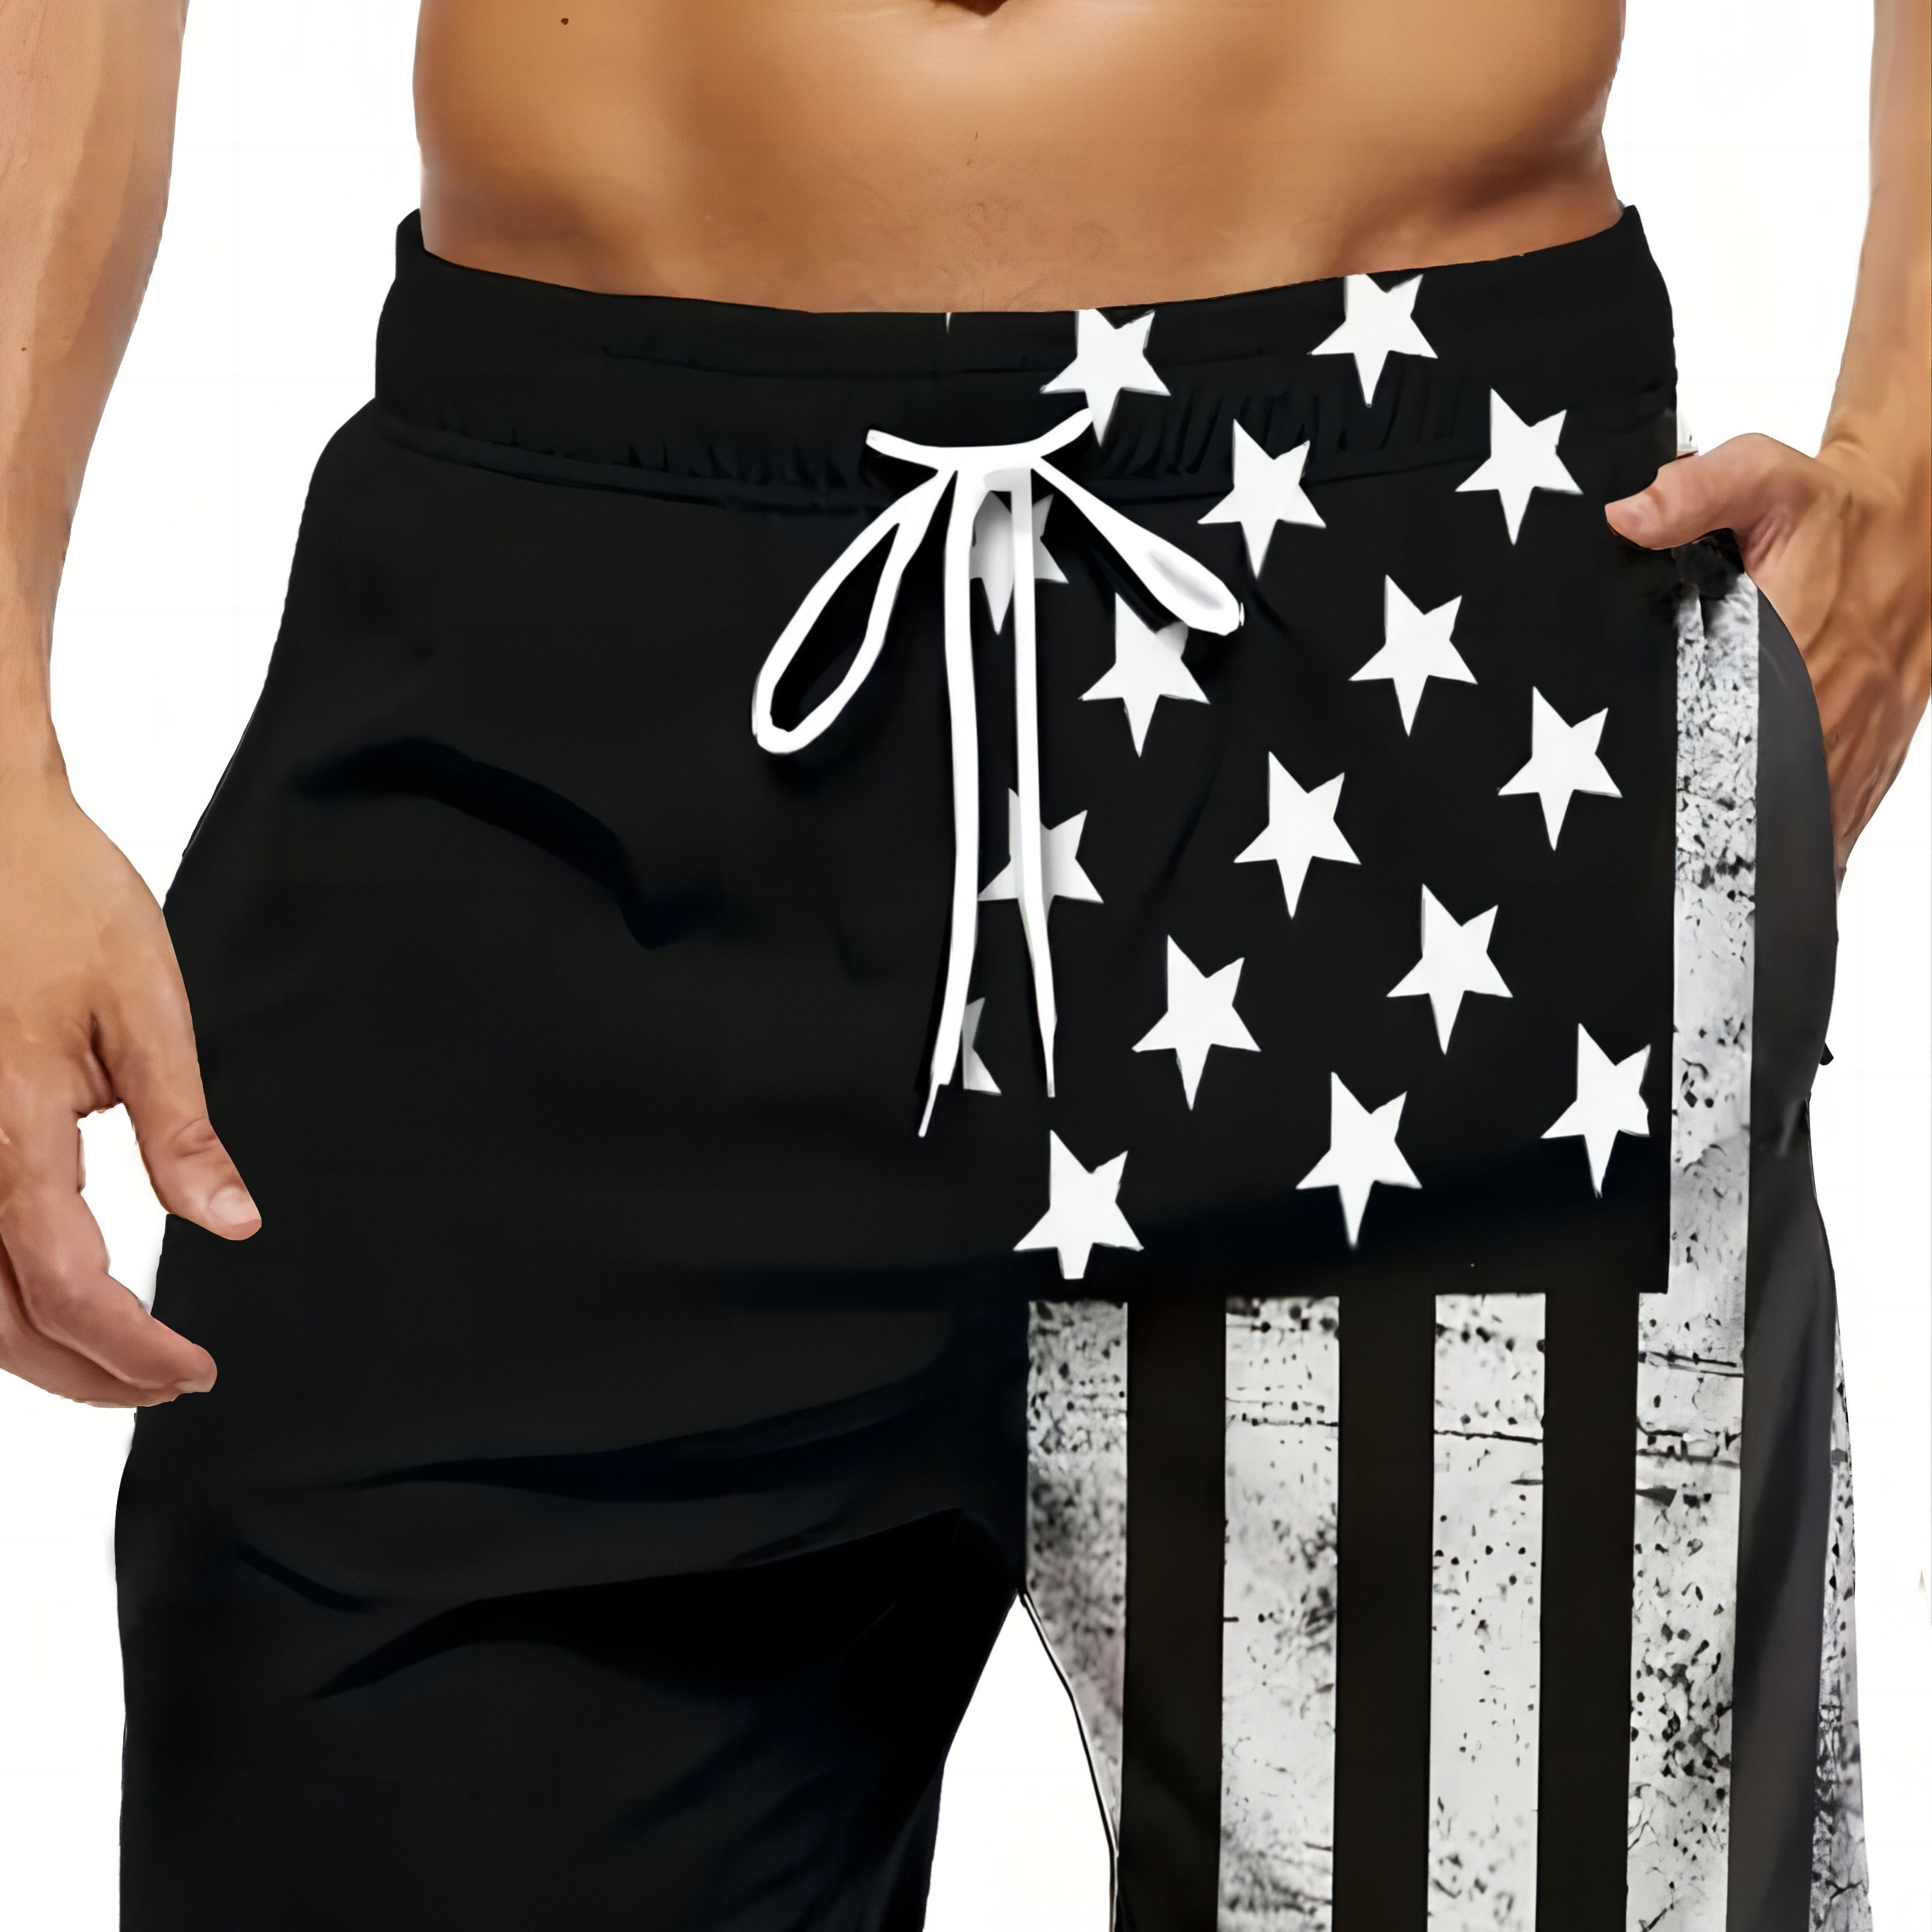 

Men's Contrast Color American Flag Pattern Print Shorts With Drawstring And Pockets, Chic And Trendy Shorts For Summer Outdoors And Sports Wear